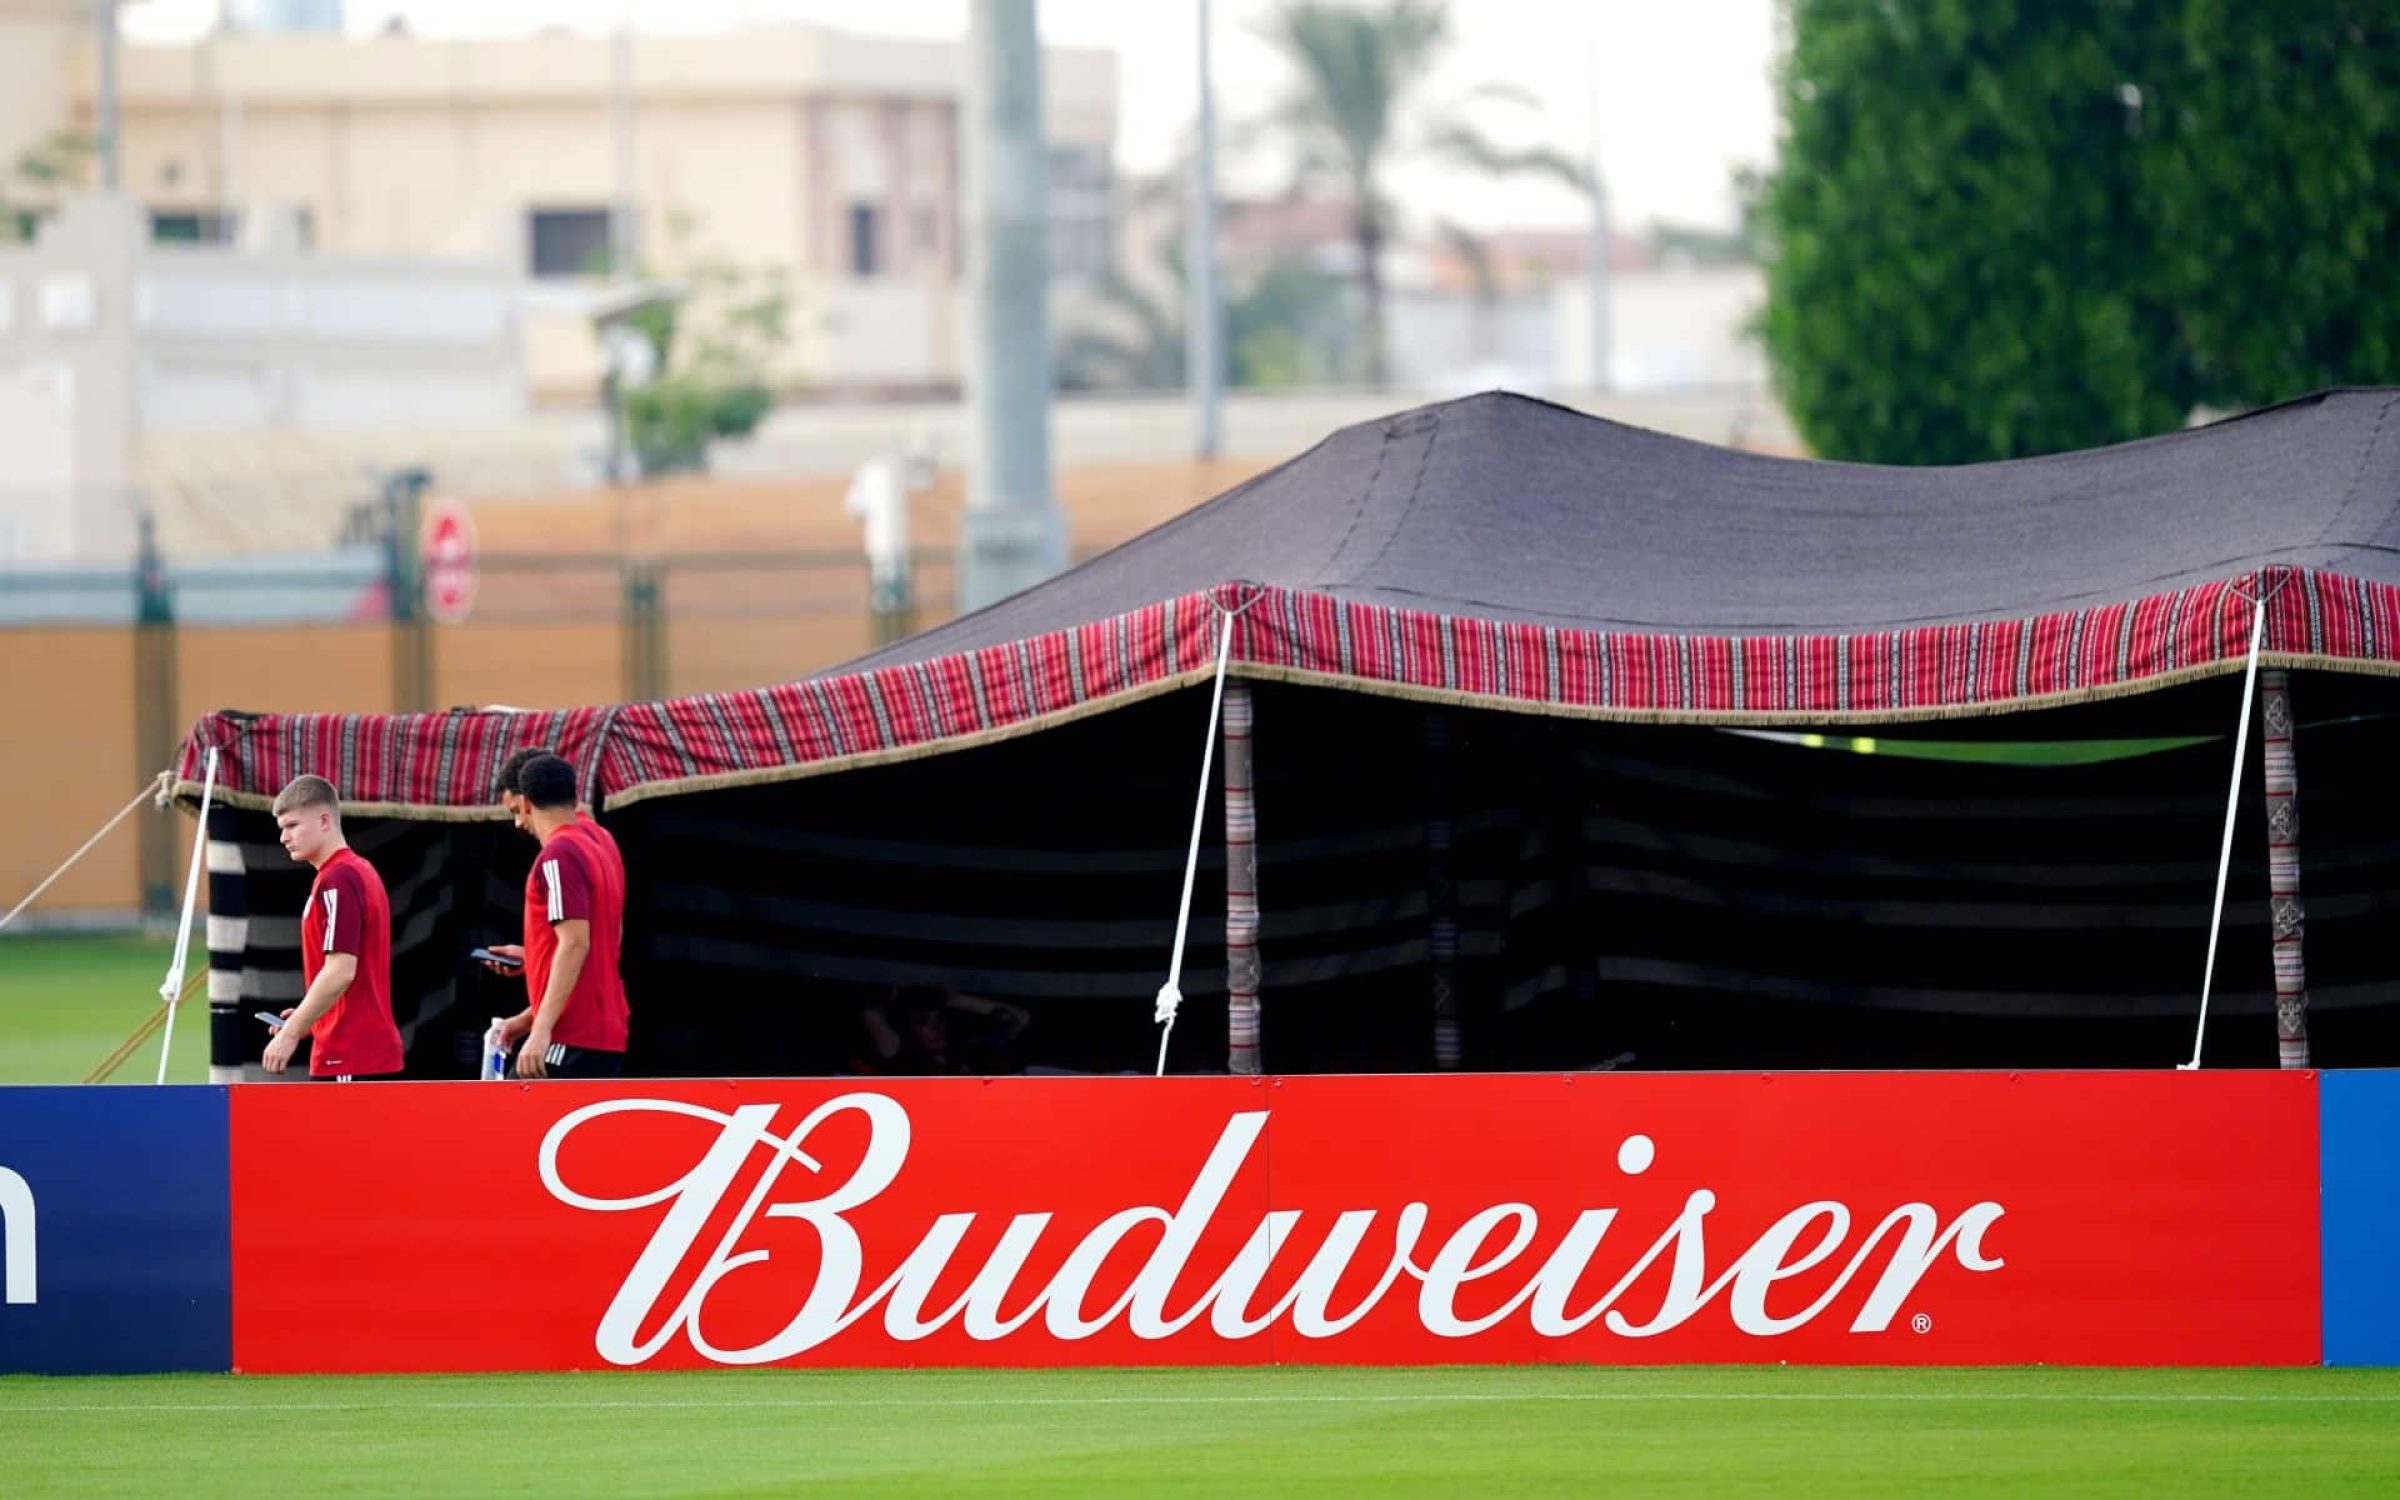 A general view of a Budweiser advertisement board at the Al Sadd Sports Club, Doha. The sale of alcohol to fans at World Cup stadiums in Qatar has been banned with just two days to go until the tournament kicks off. Fans will no longer be able to buy Budweiser, which would have been the only alcoholic beverage available to fans due to its sponsorship of FIFA. Picture date: Friday November 18, 2022